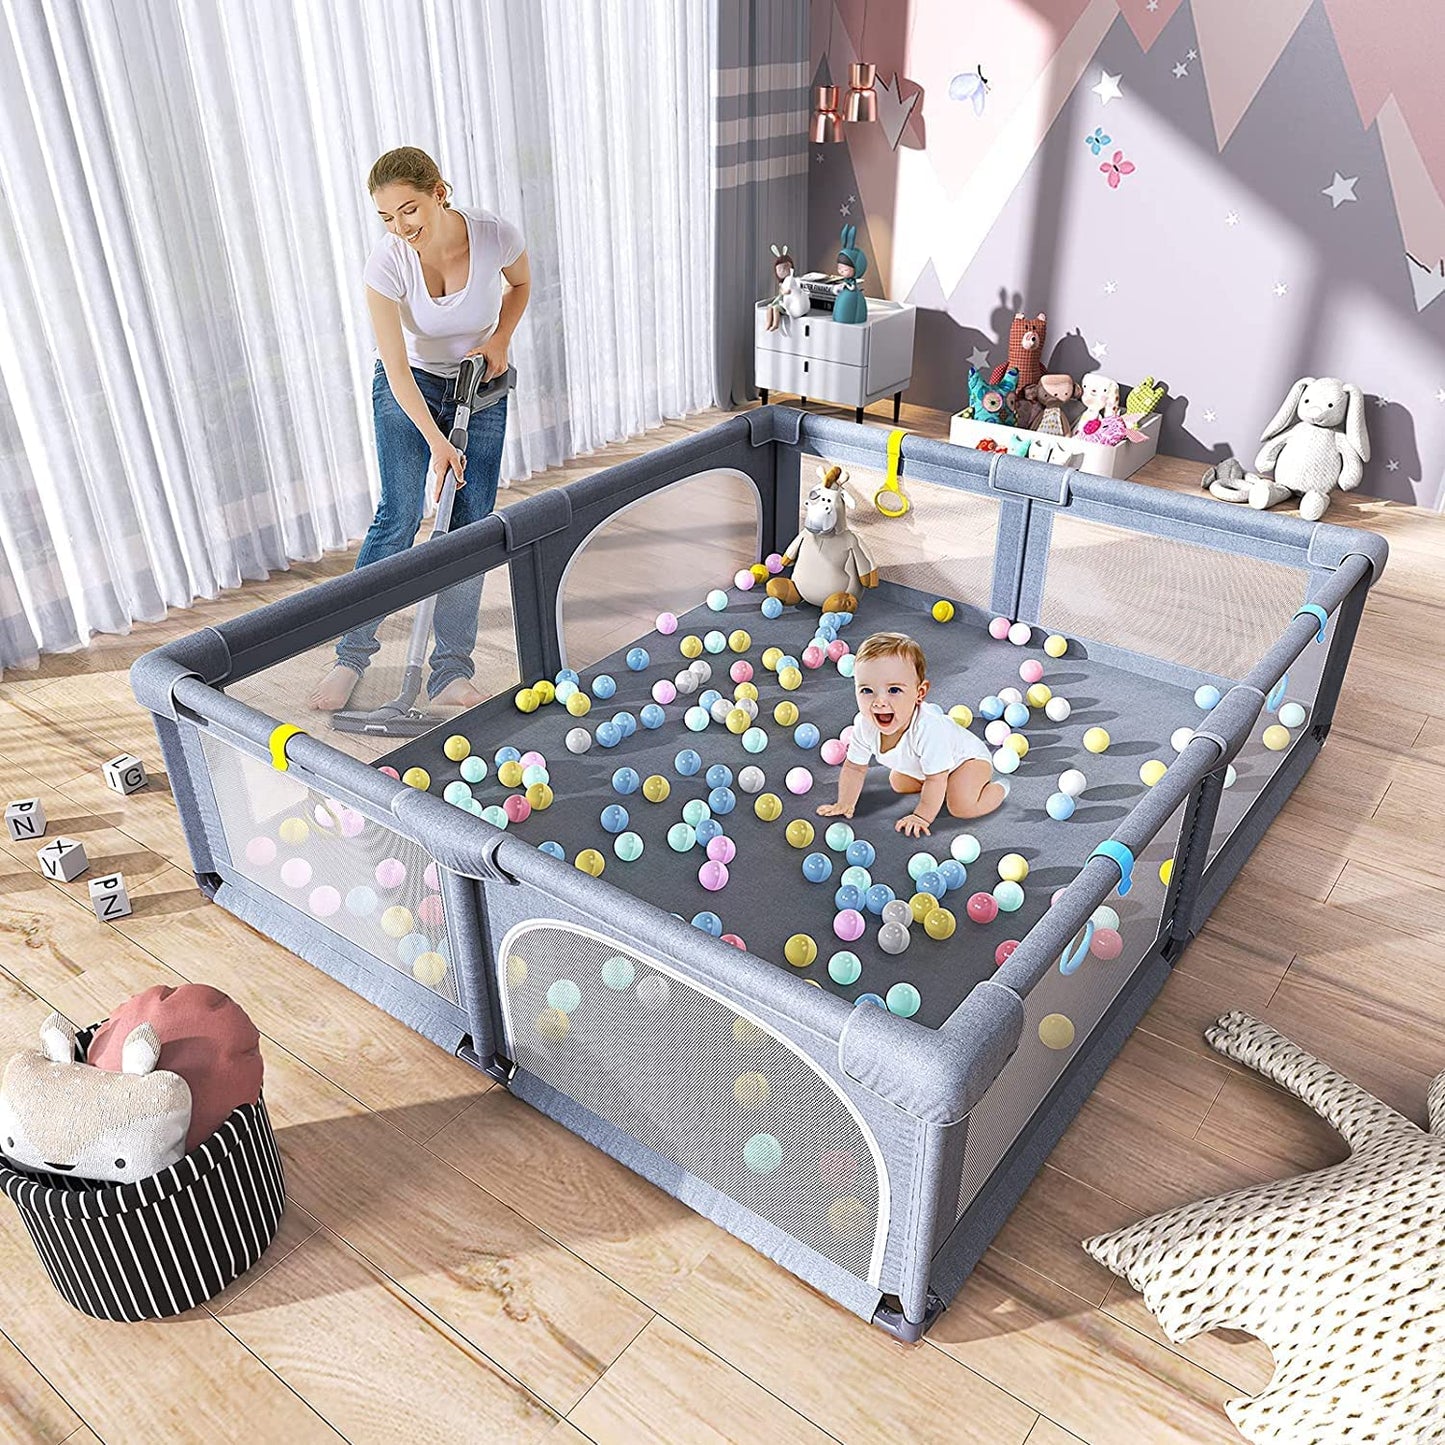 Portable Baby Playpen fence for Toddlers, 150*180 cm - Buy Portable Baby Playpen fence for Toddlers, 150*180 cm in Dubai - HOCC Dubai - Baby playground outdoor - Shop baby product - Shop Pet product - shop home decor and lighting in Dubai - HOCC Dubai - 